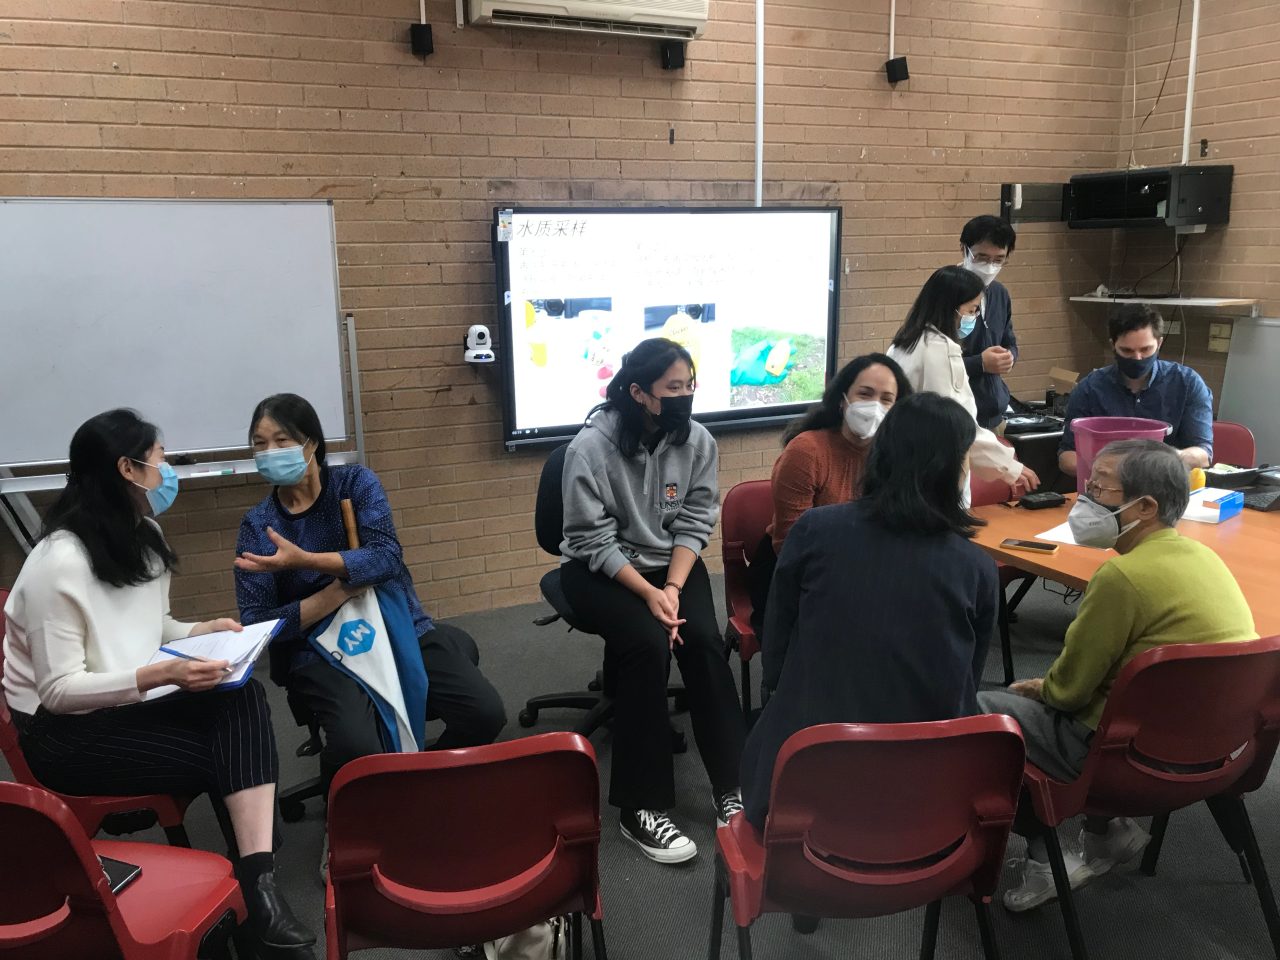 UNSW students sitting on chairs in a room collaborating 